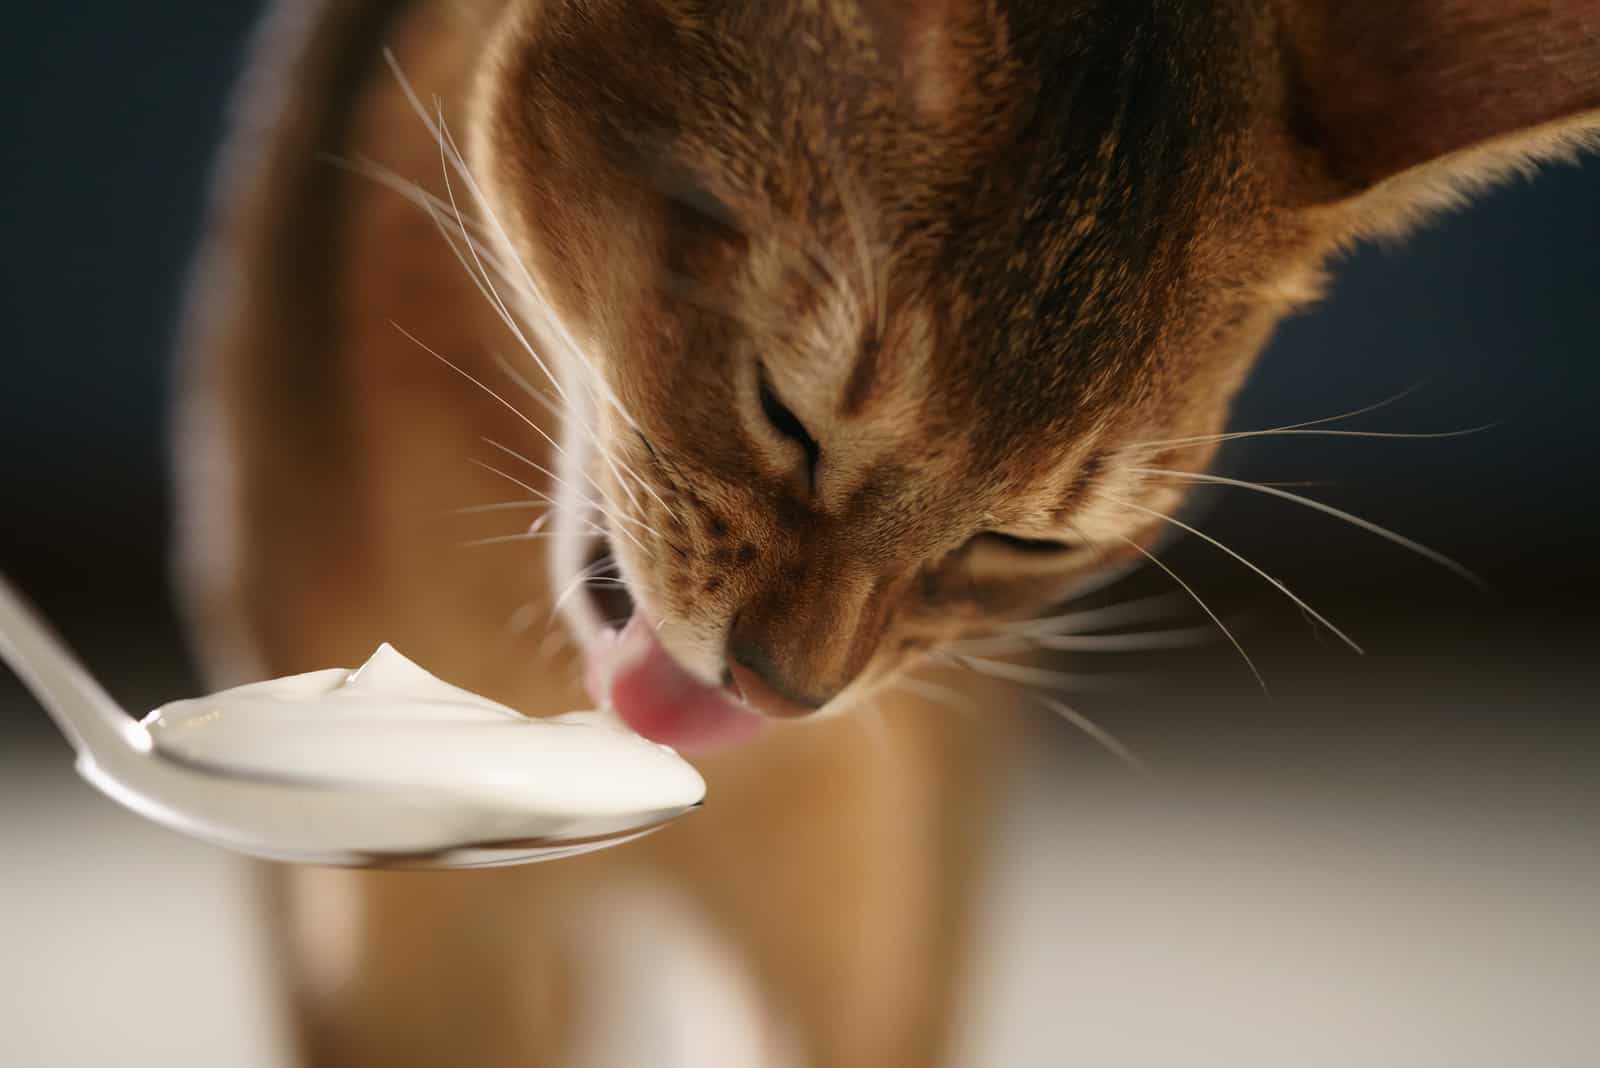 cat licking whipped cream from spoon